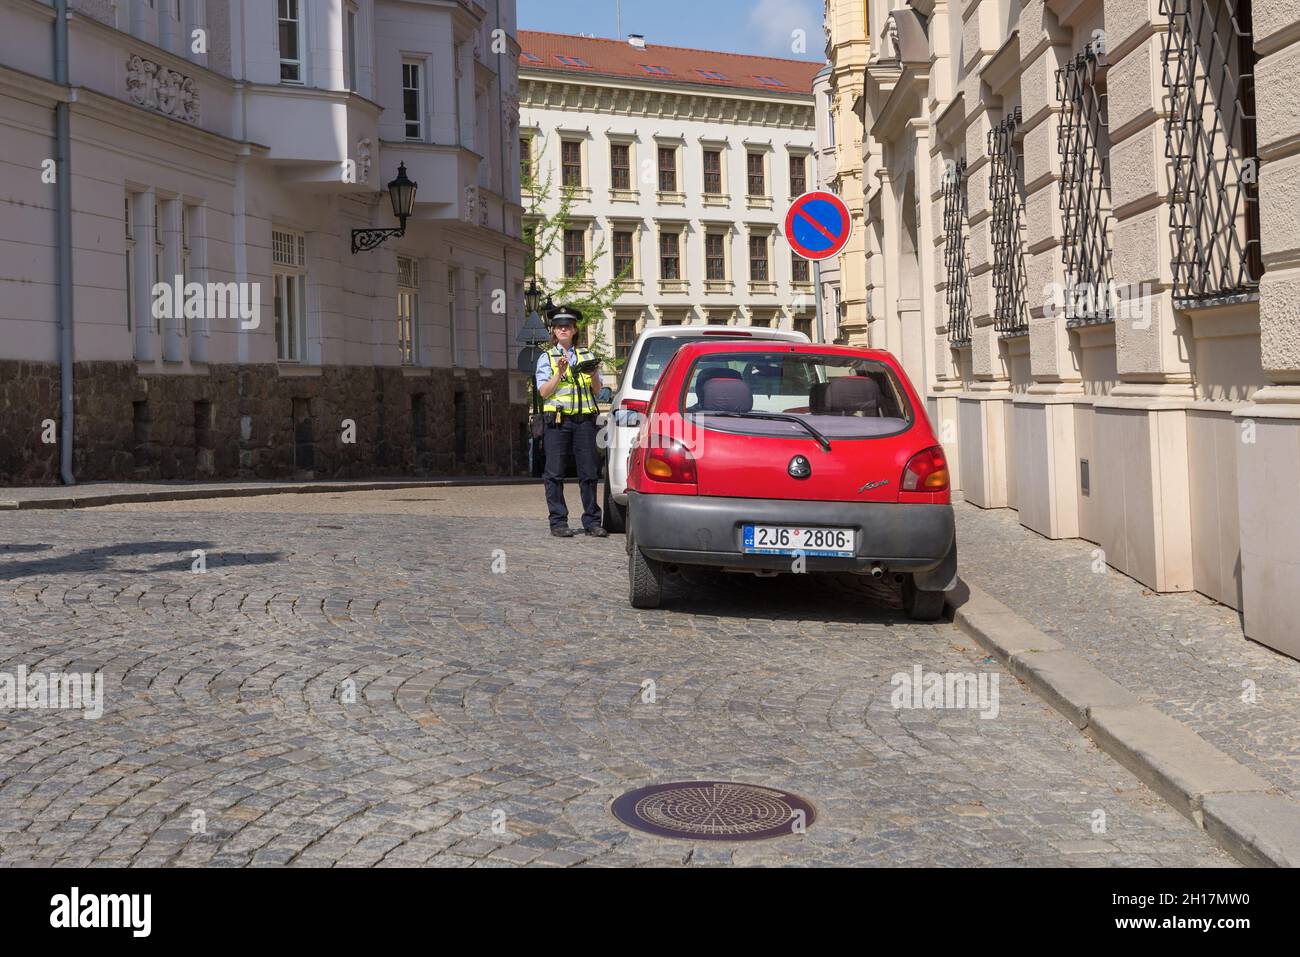 BRNO, CZECH REPUBLIC - APRIL 24, 2018: A policewoman issues a fine for incorrect parking on a city street Stock Photo